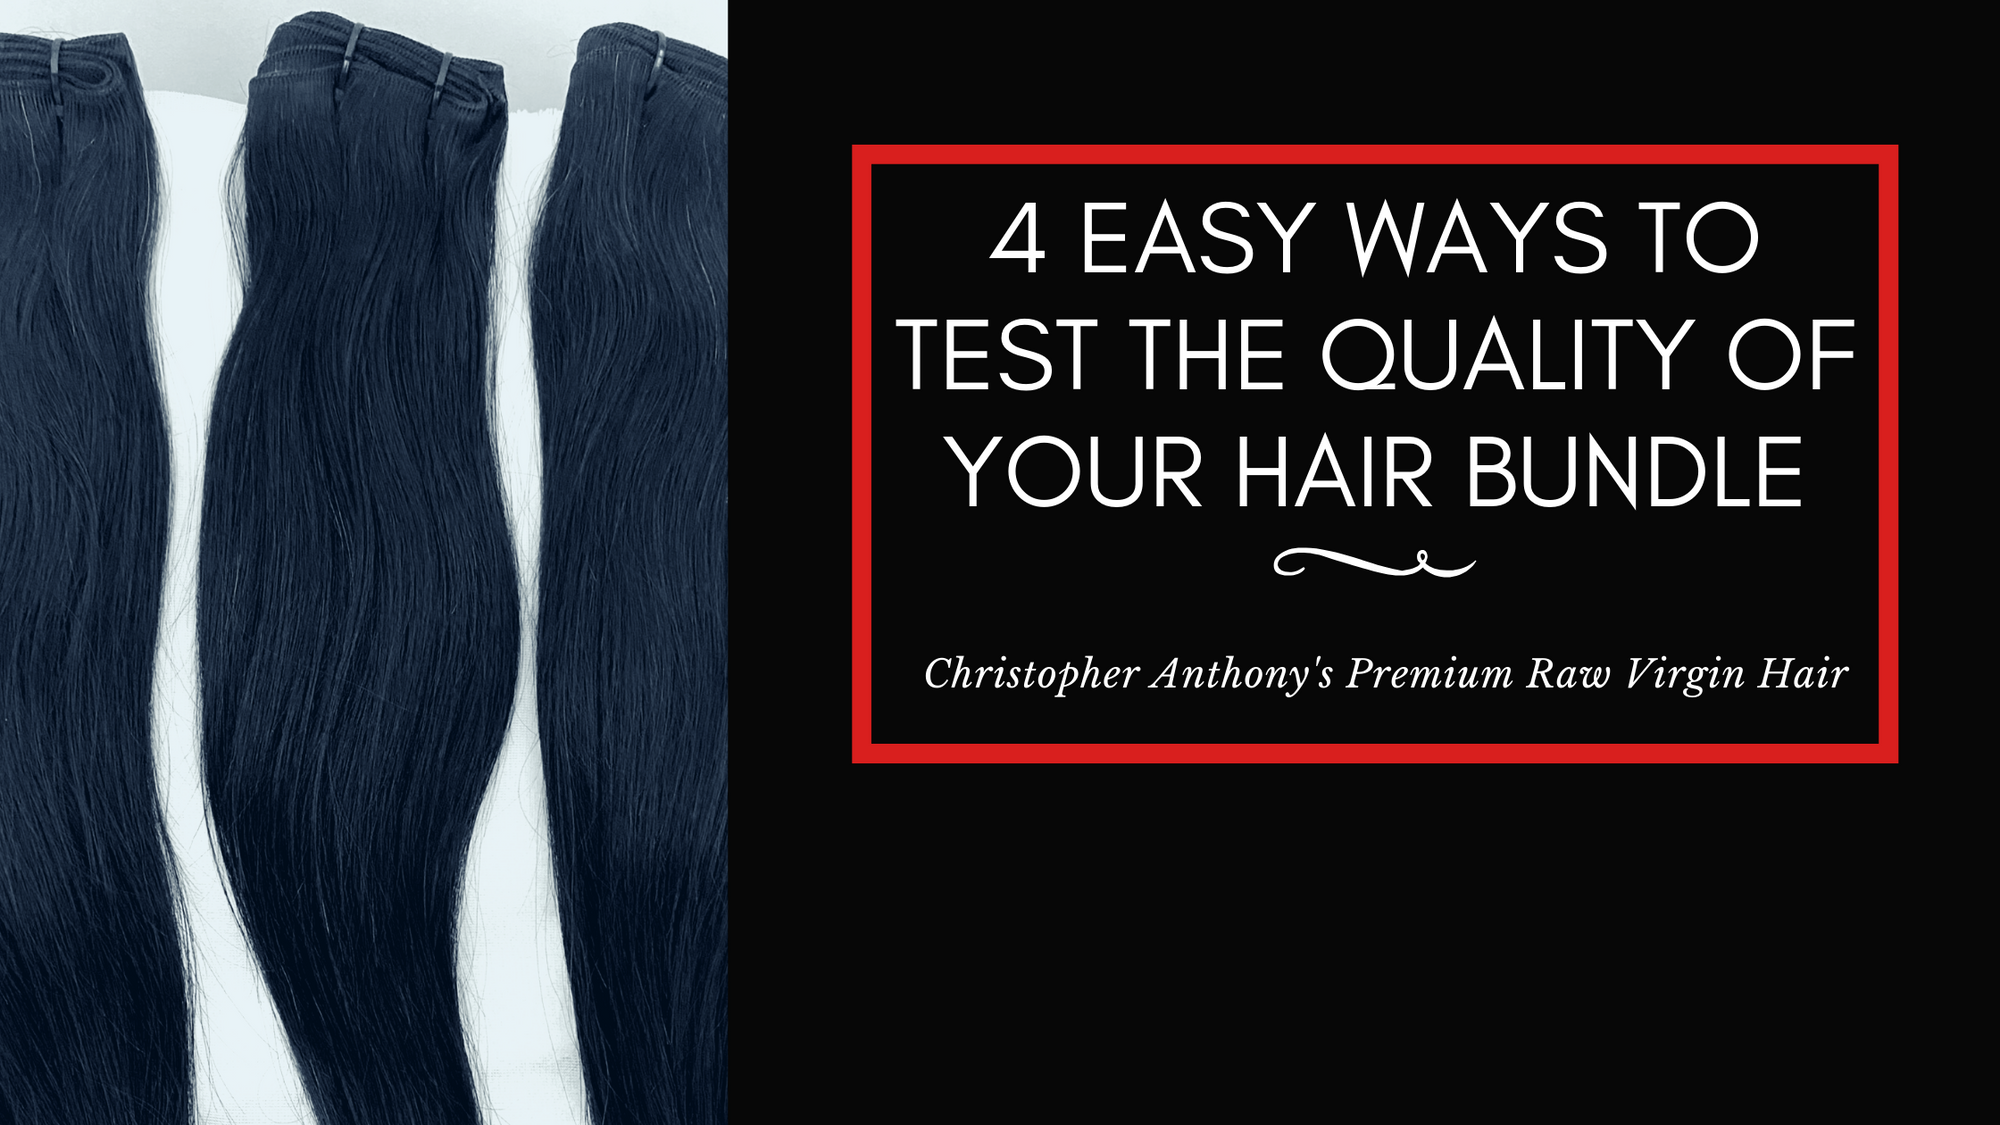 4 Easy Ways to Test the Quality of Your Hair Bundle